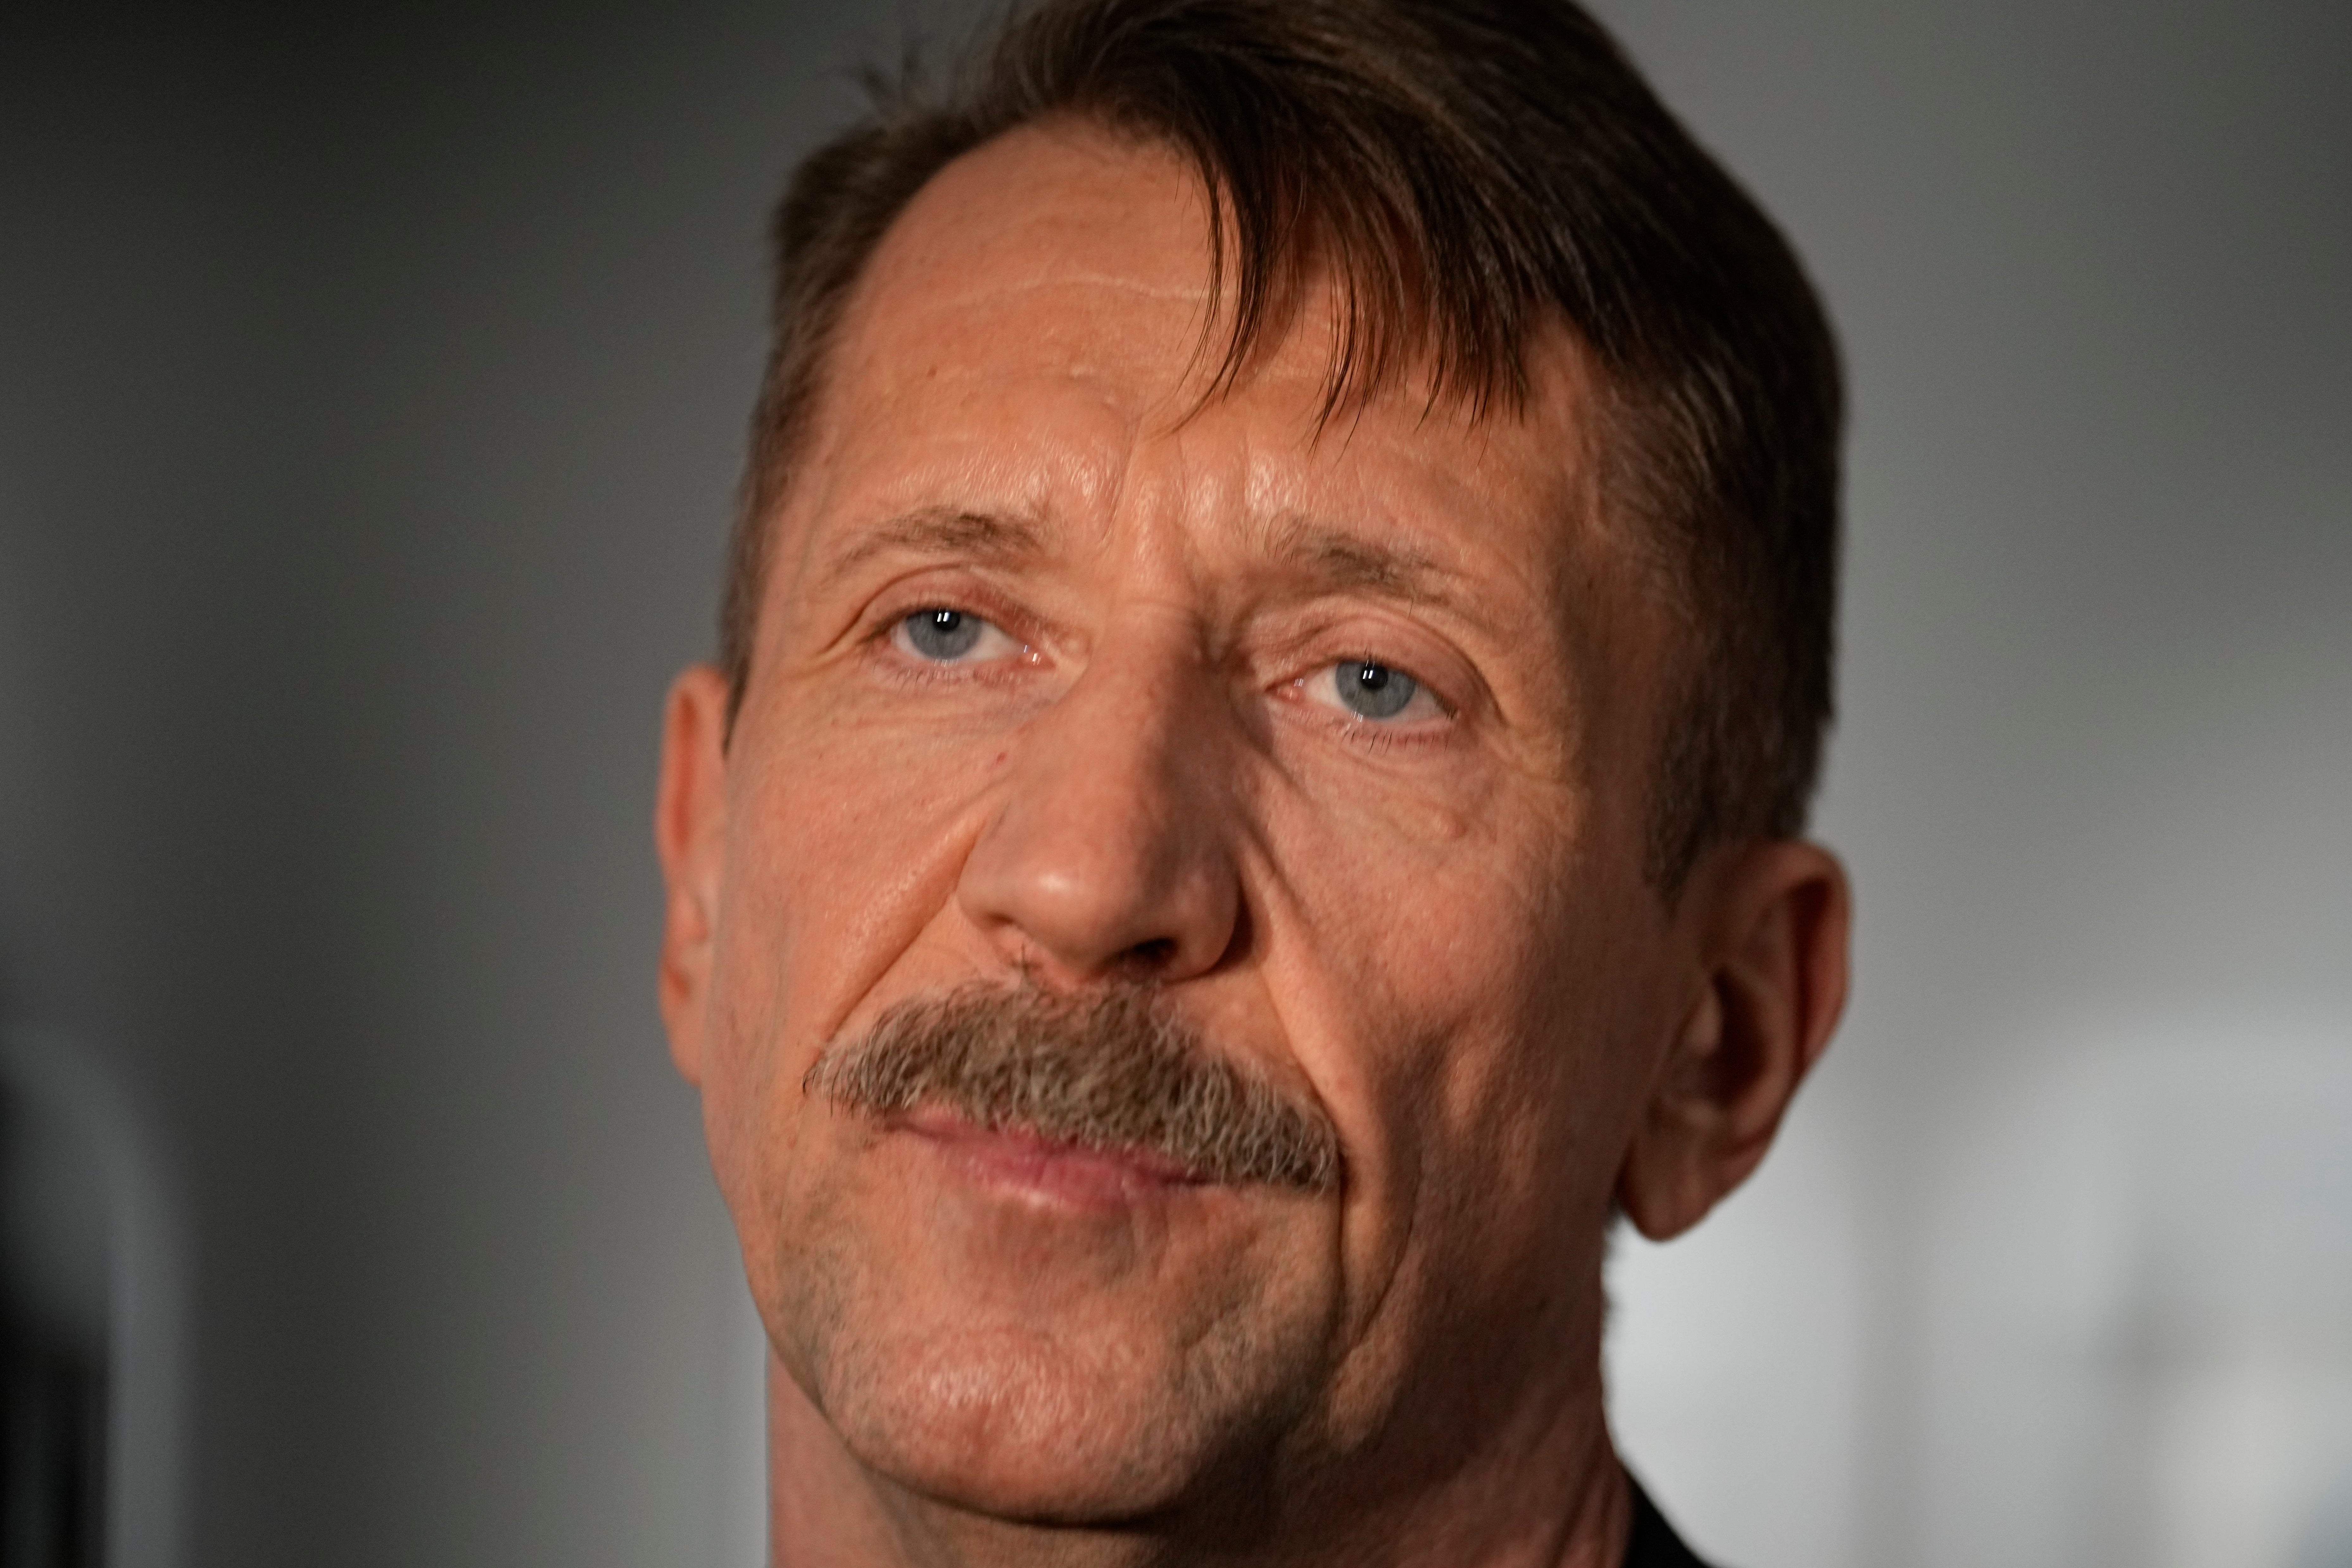 Russian arms dealer Viktor Bout, who was exchanged for U.S. basketball player Brittney Griner